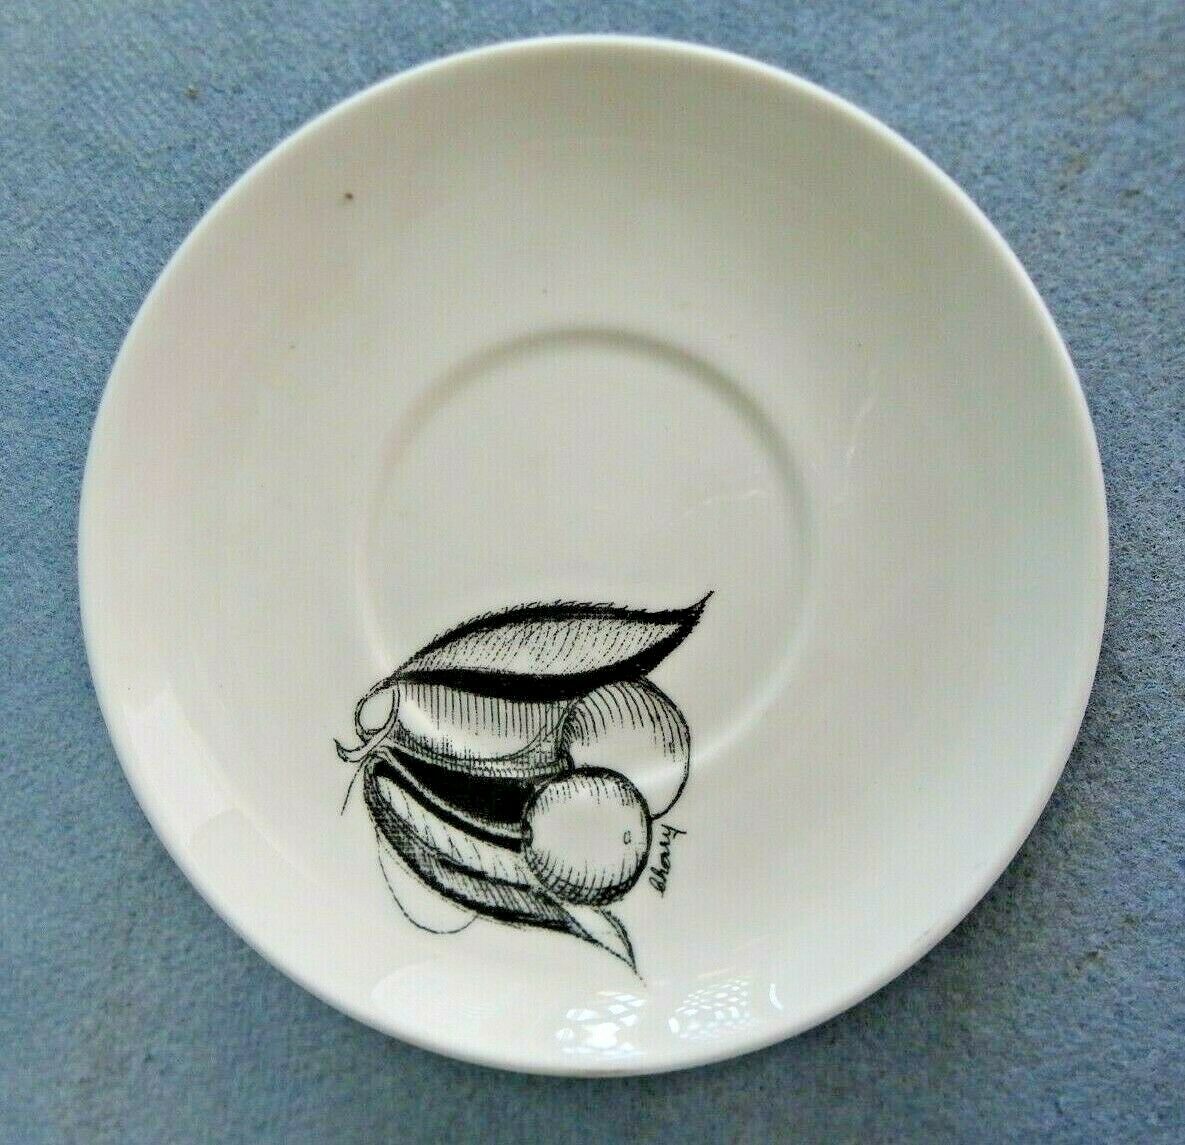 Susie Cooper Black Fruit Saucer For Demitasse Cup "cherry"